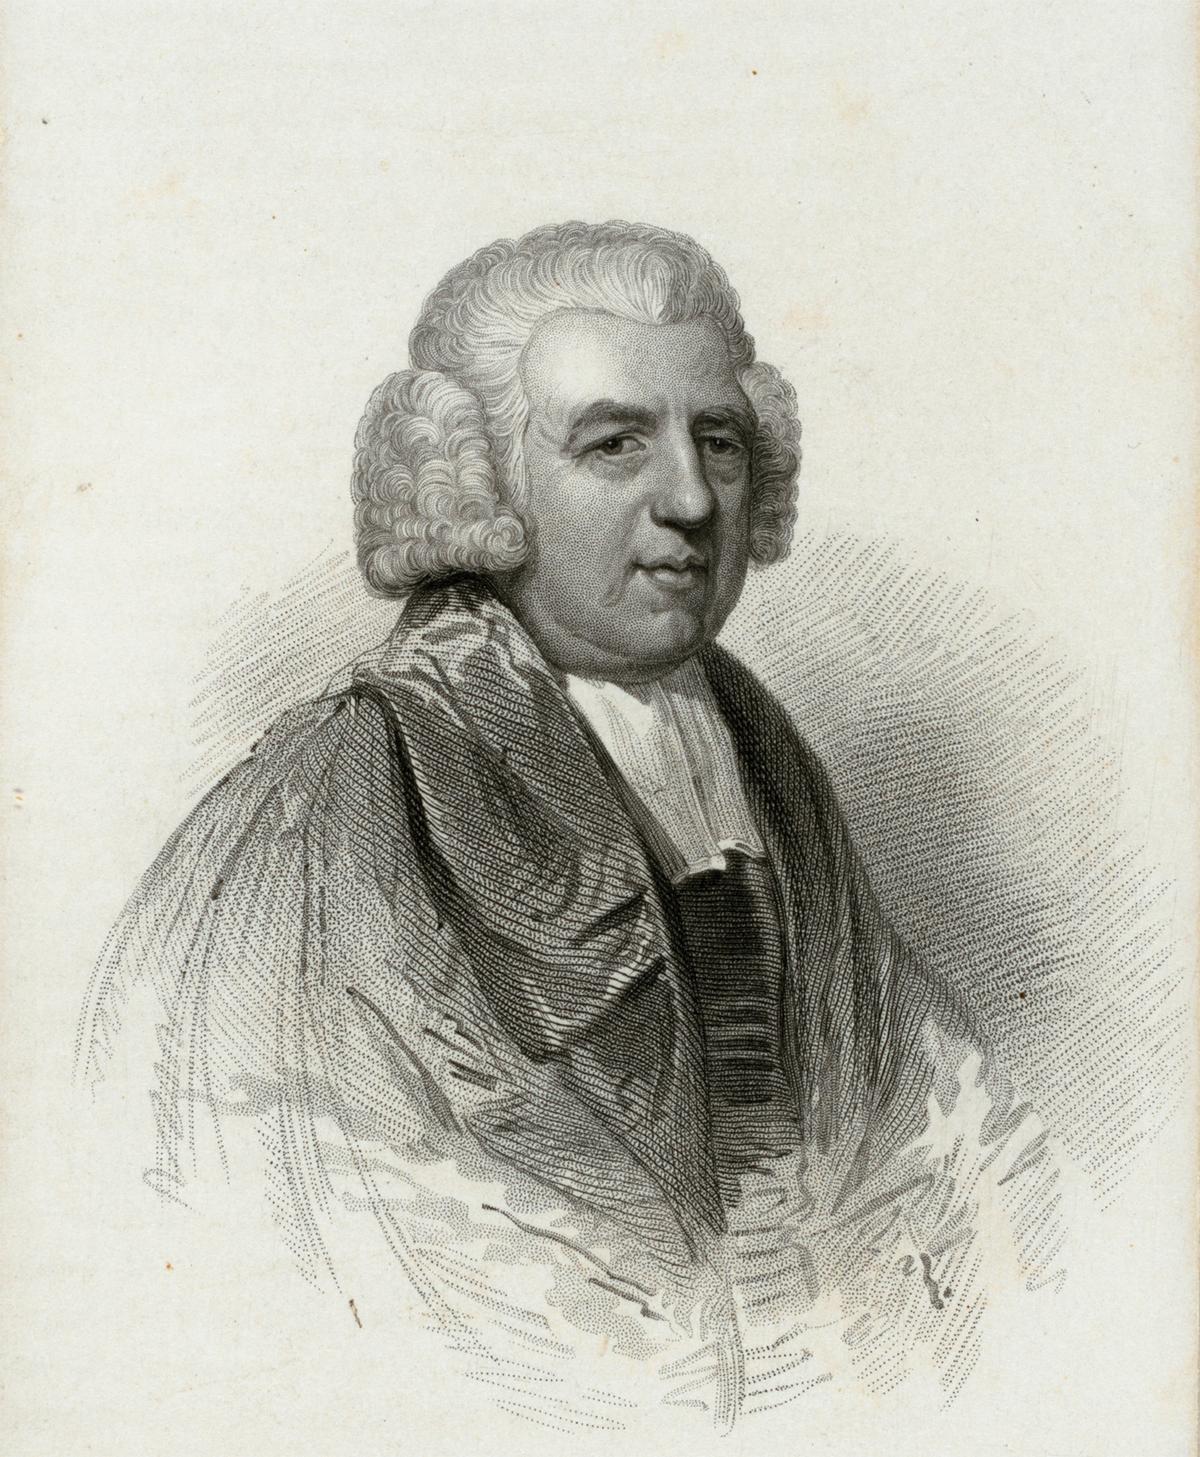 Drawing of John Newton, 1880, by W. Harvey and engraved by H. Robinson. The New York Public Library. (Public Domain)